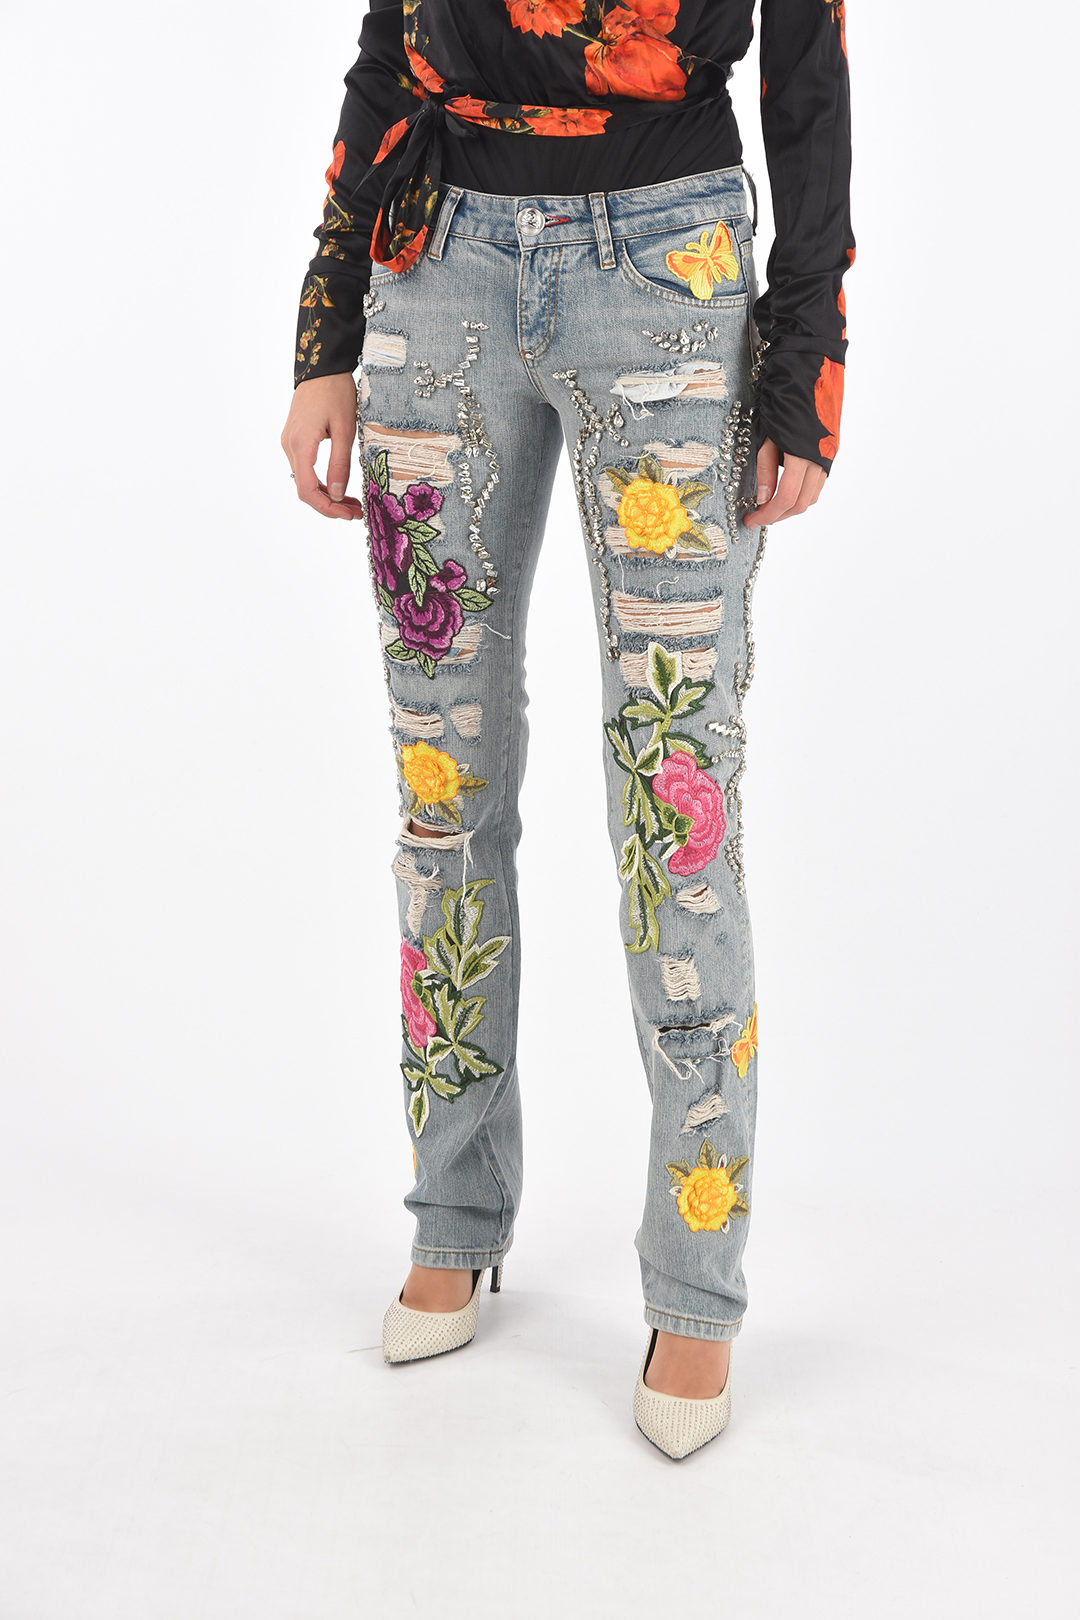 Philipp Plein crystal all over distressed FABULOUS straight jeans women - Glamood Outlet